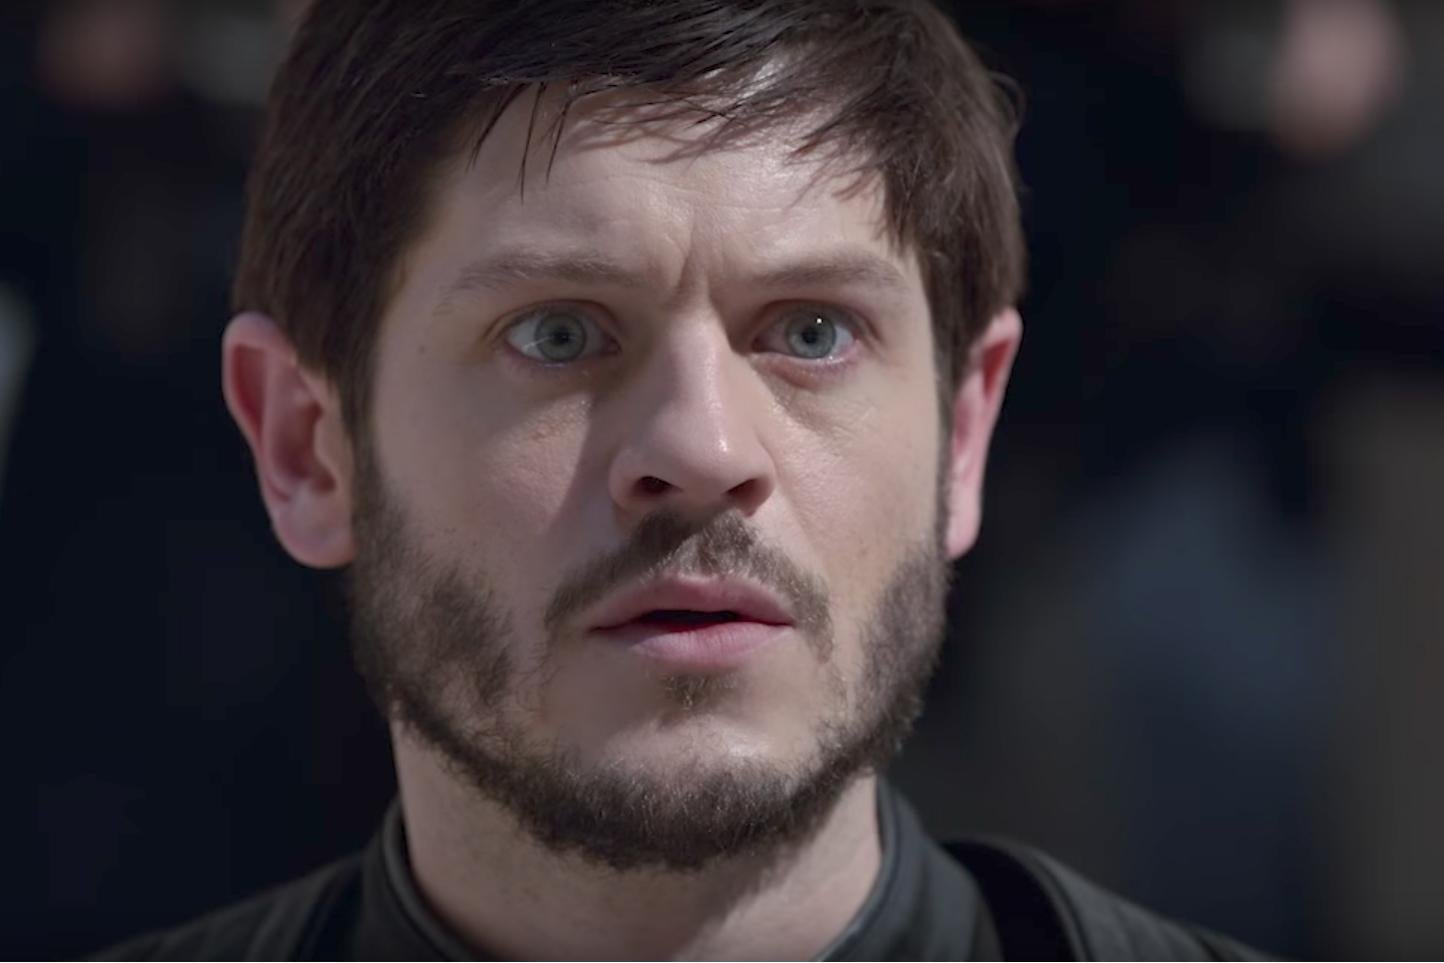 Iwan Rheon, who played Ramsay Bolton in ‘Game of Thrones’ and Simon in ‘Misfits’, will star as Maximus